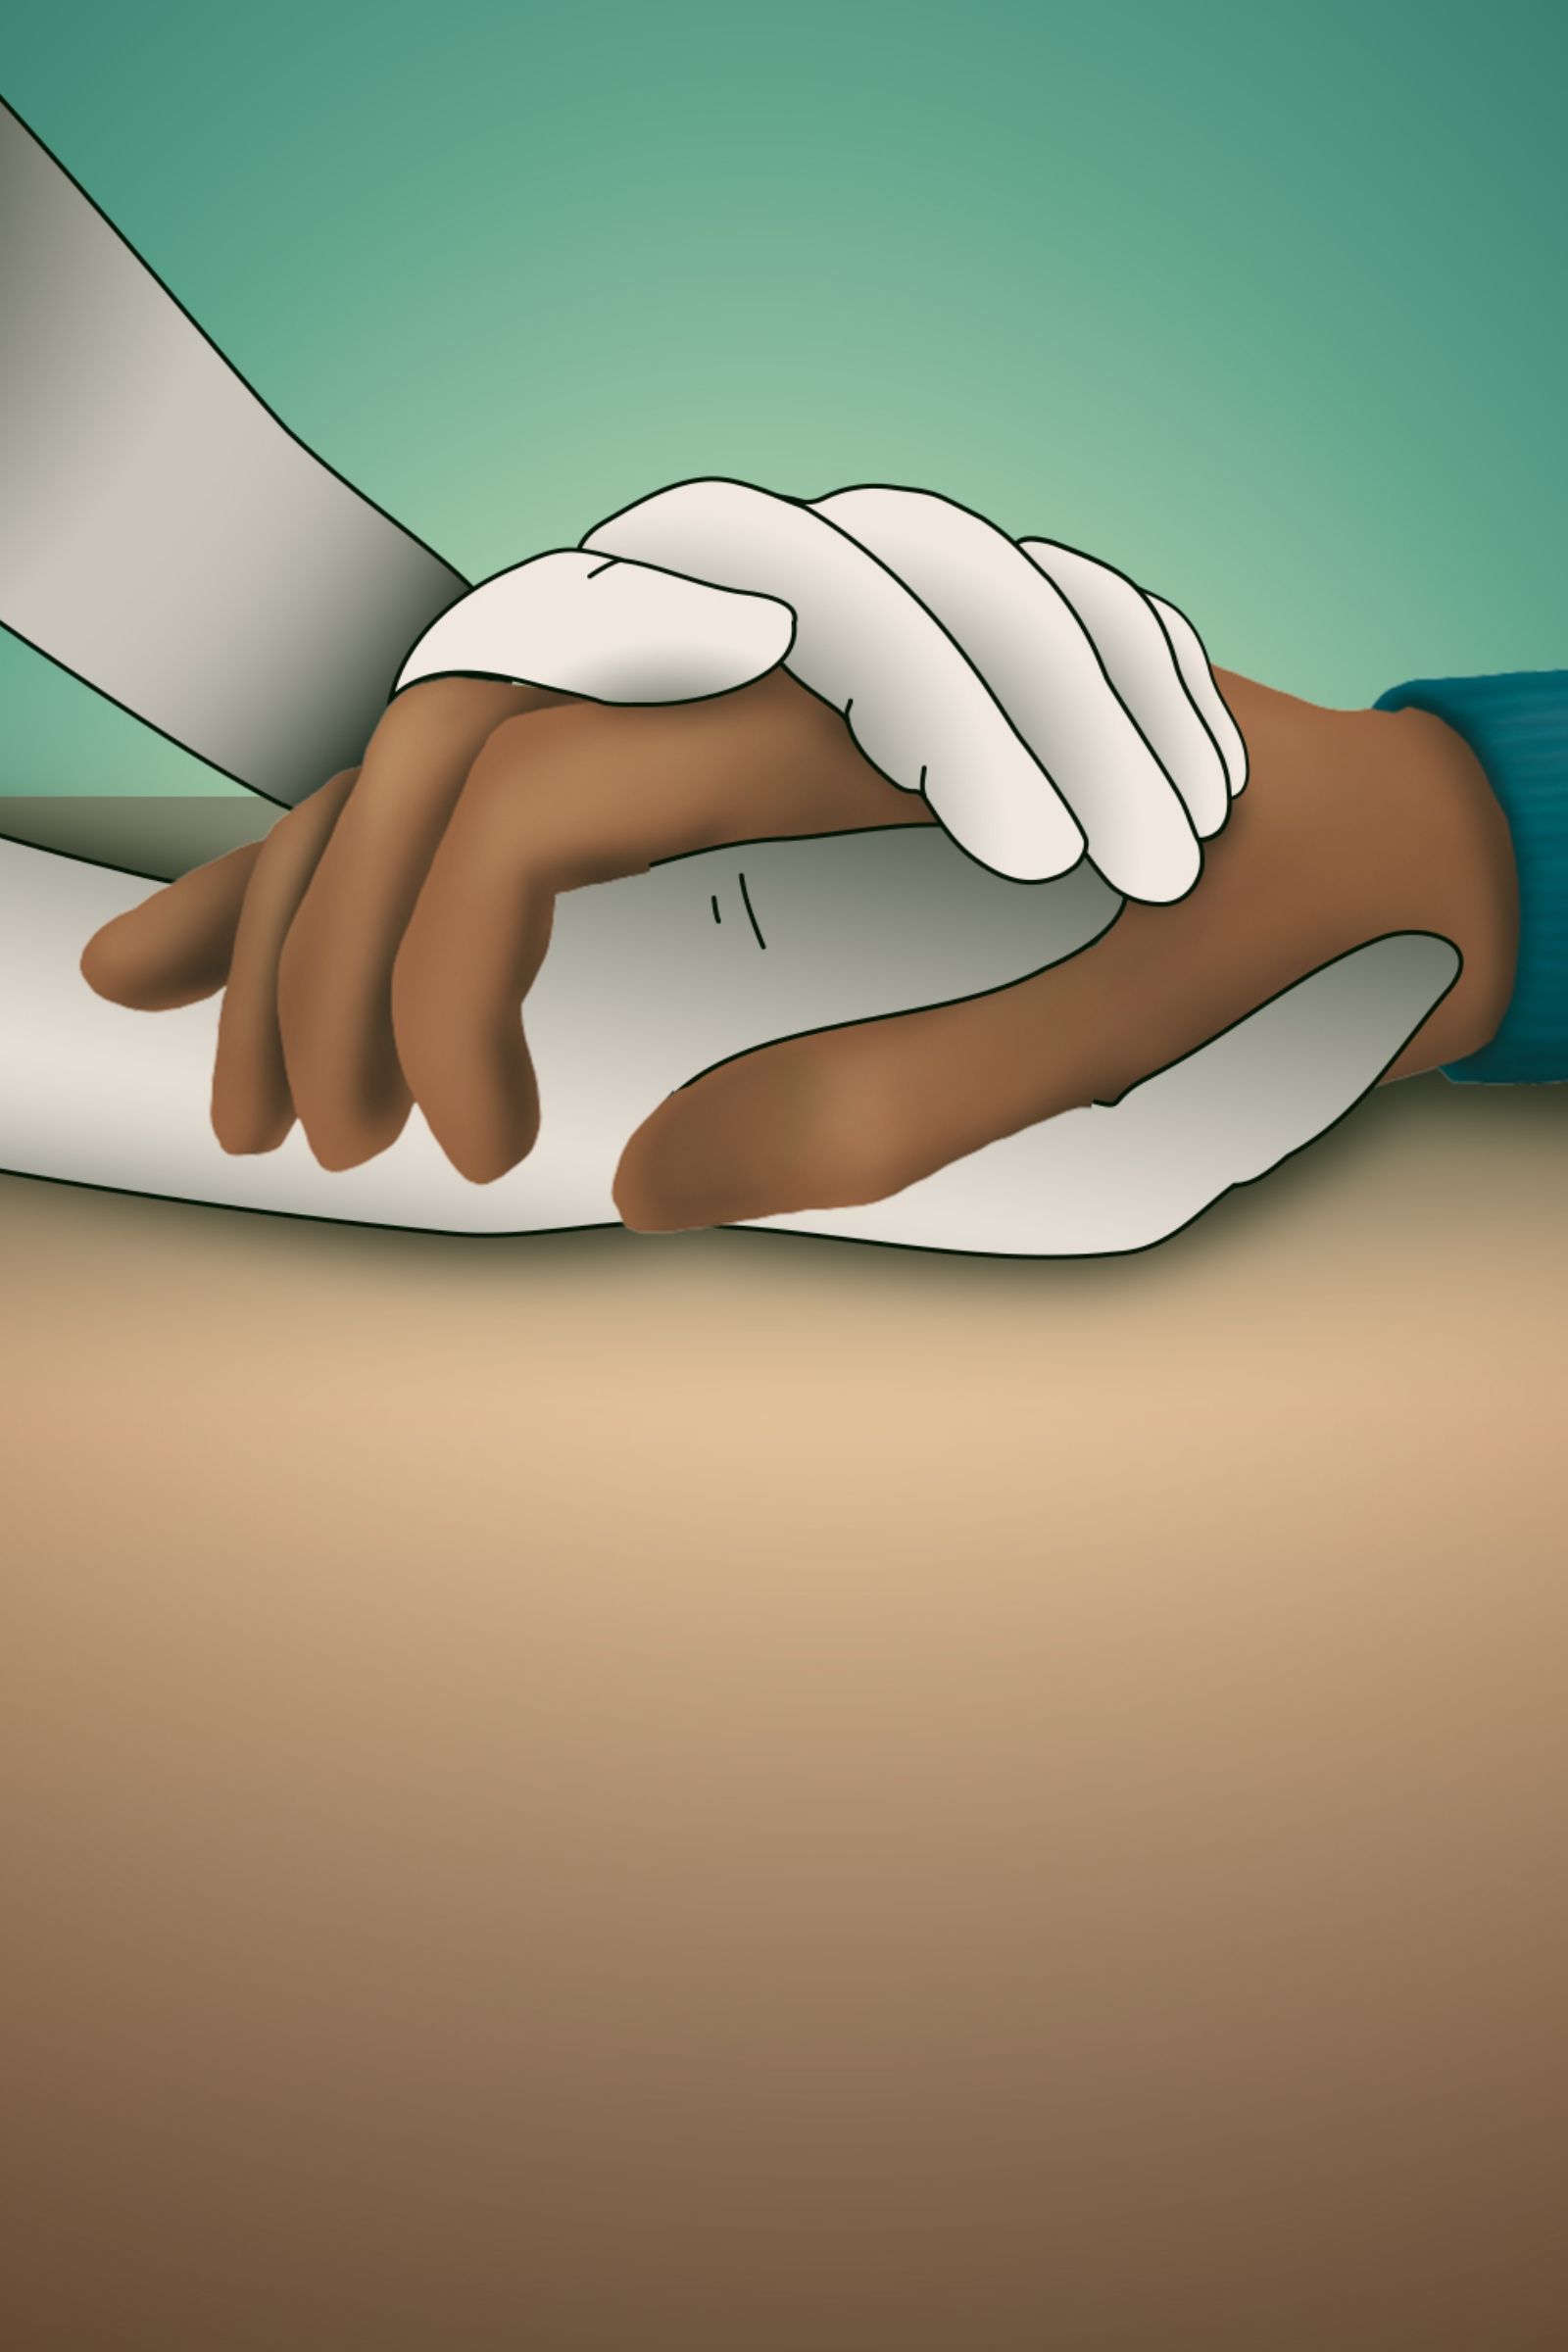 An illustrated depiction of a pair of hands holding another hand compassionately